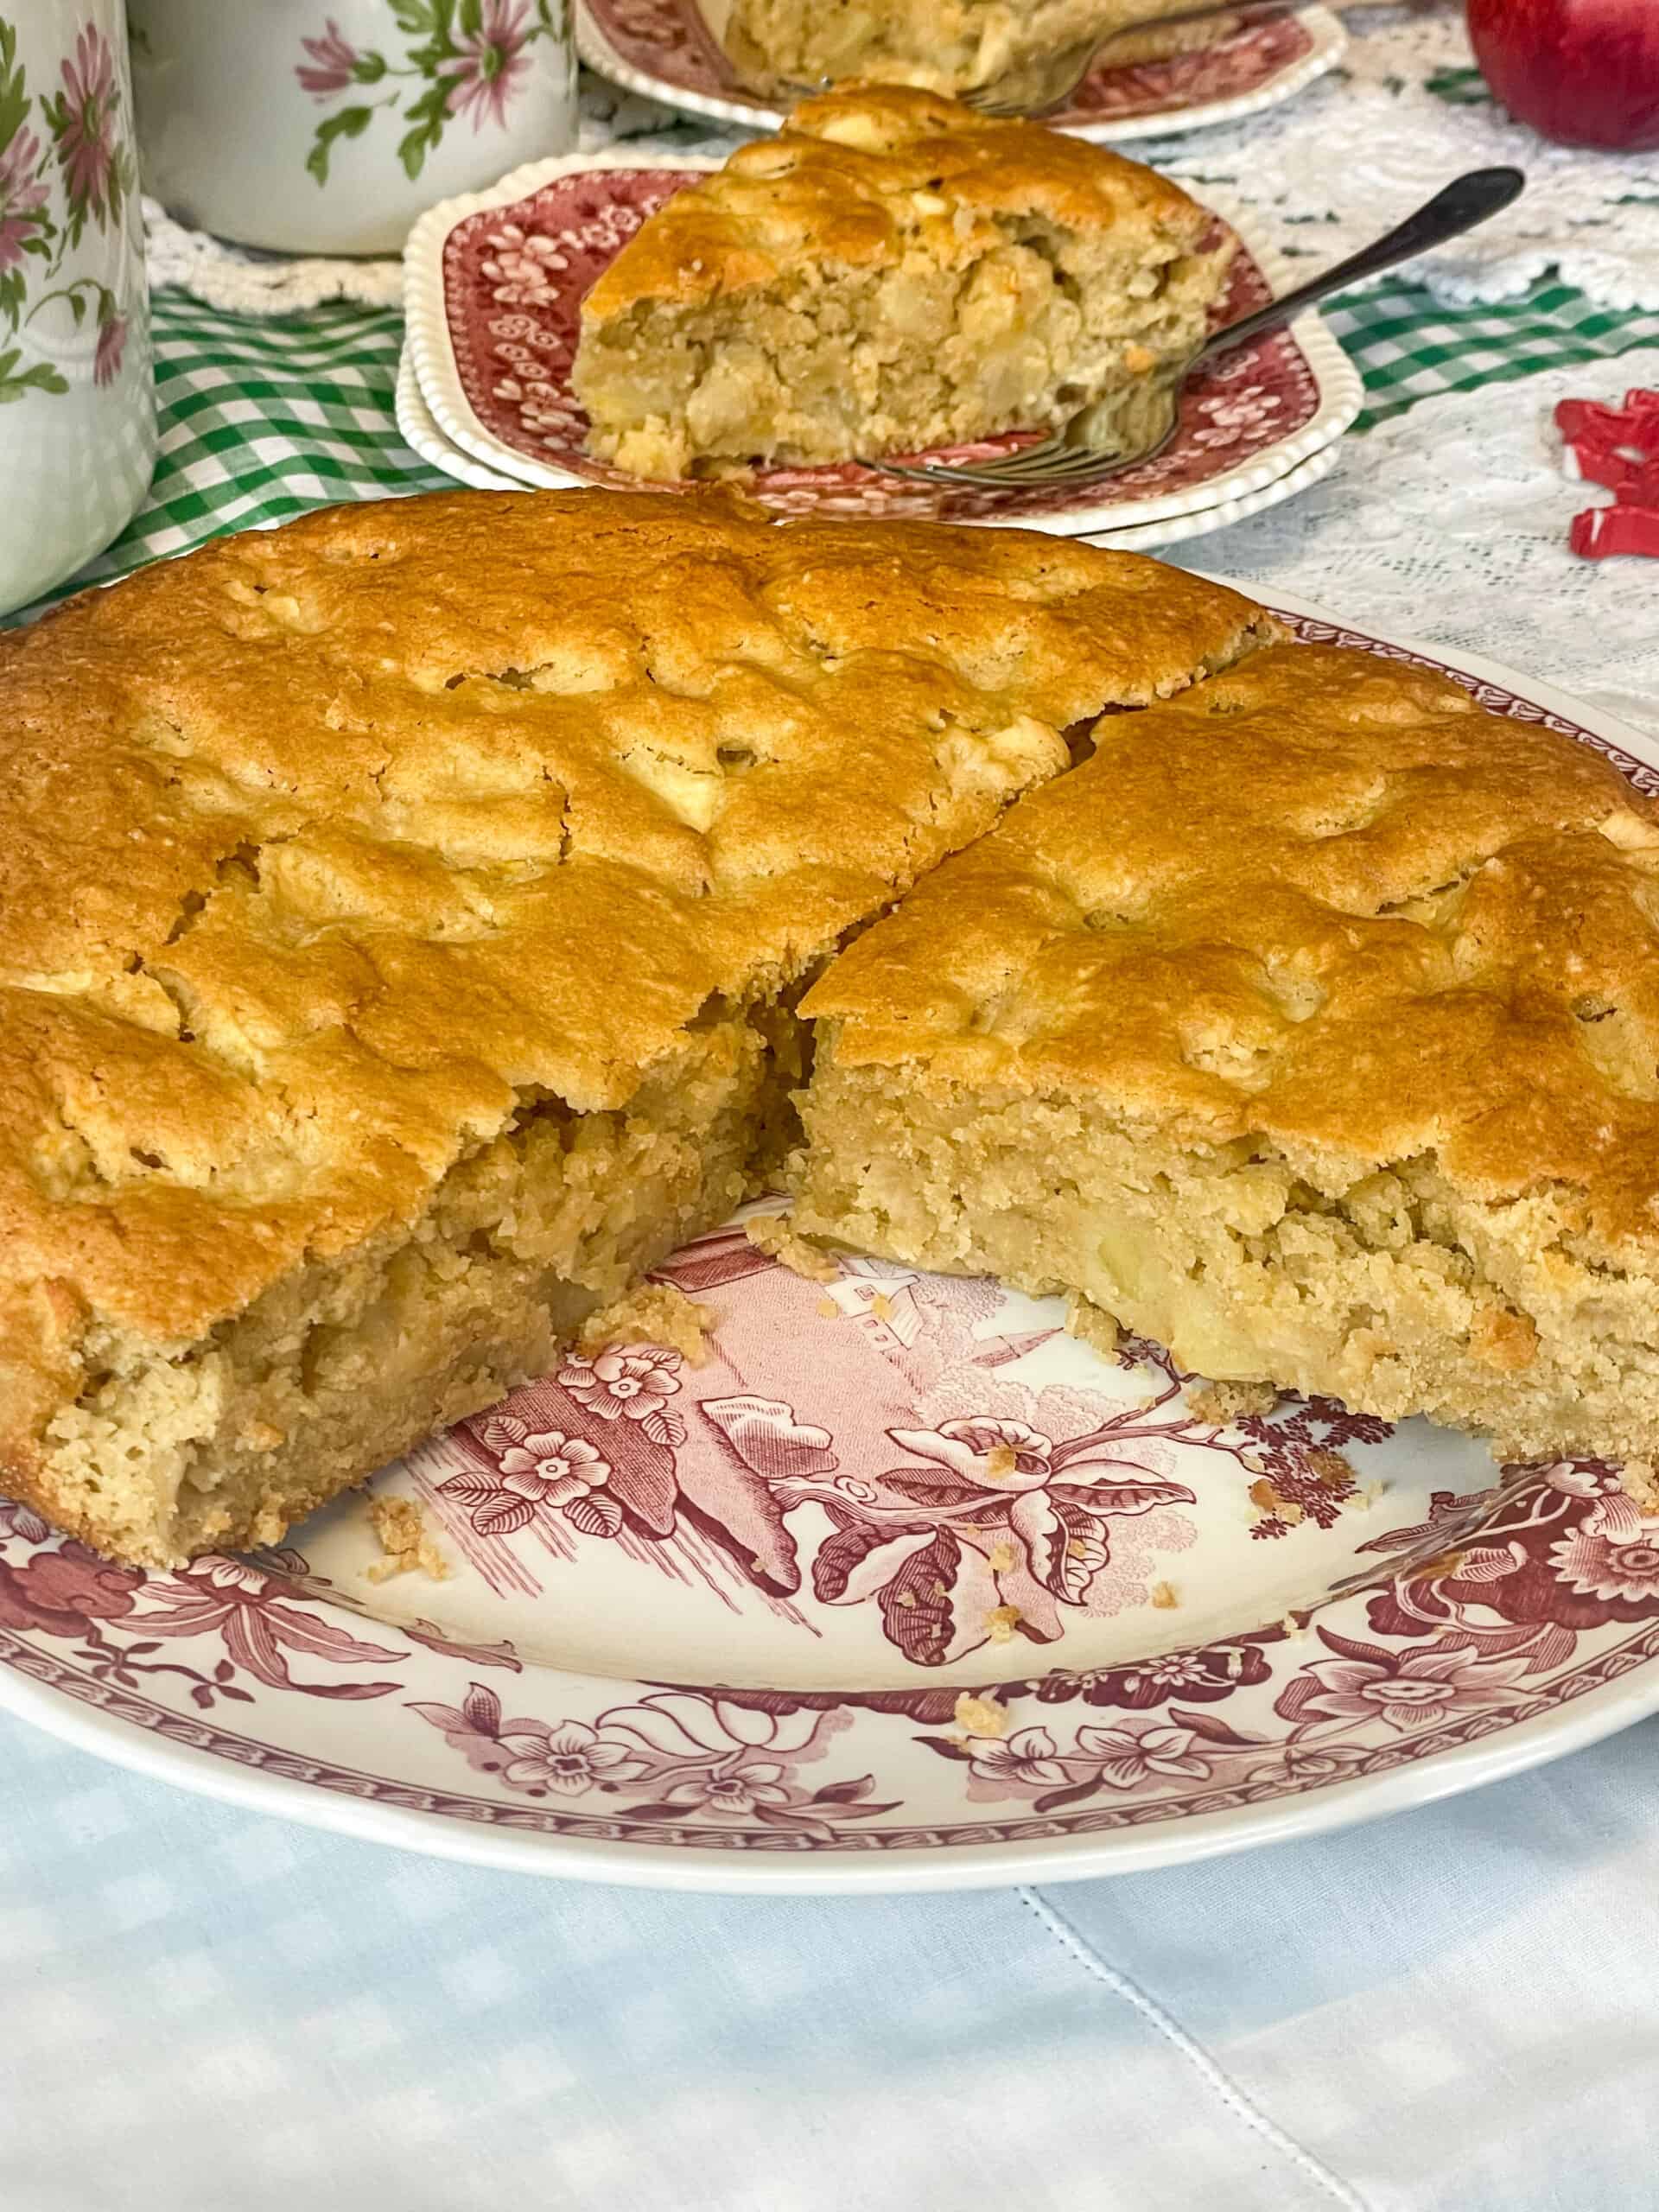 Apple cake with a large chunk removed, small slice in background.